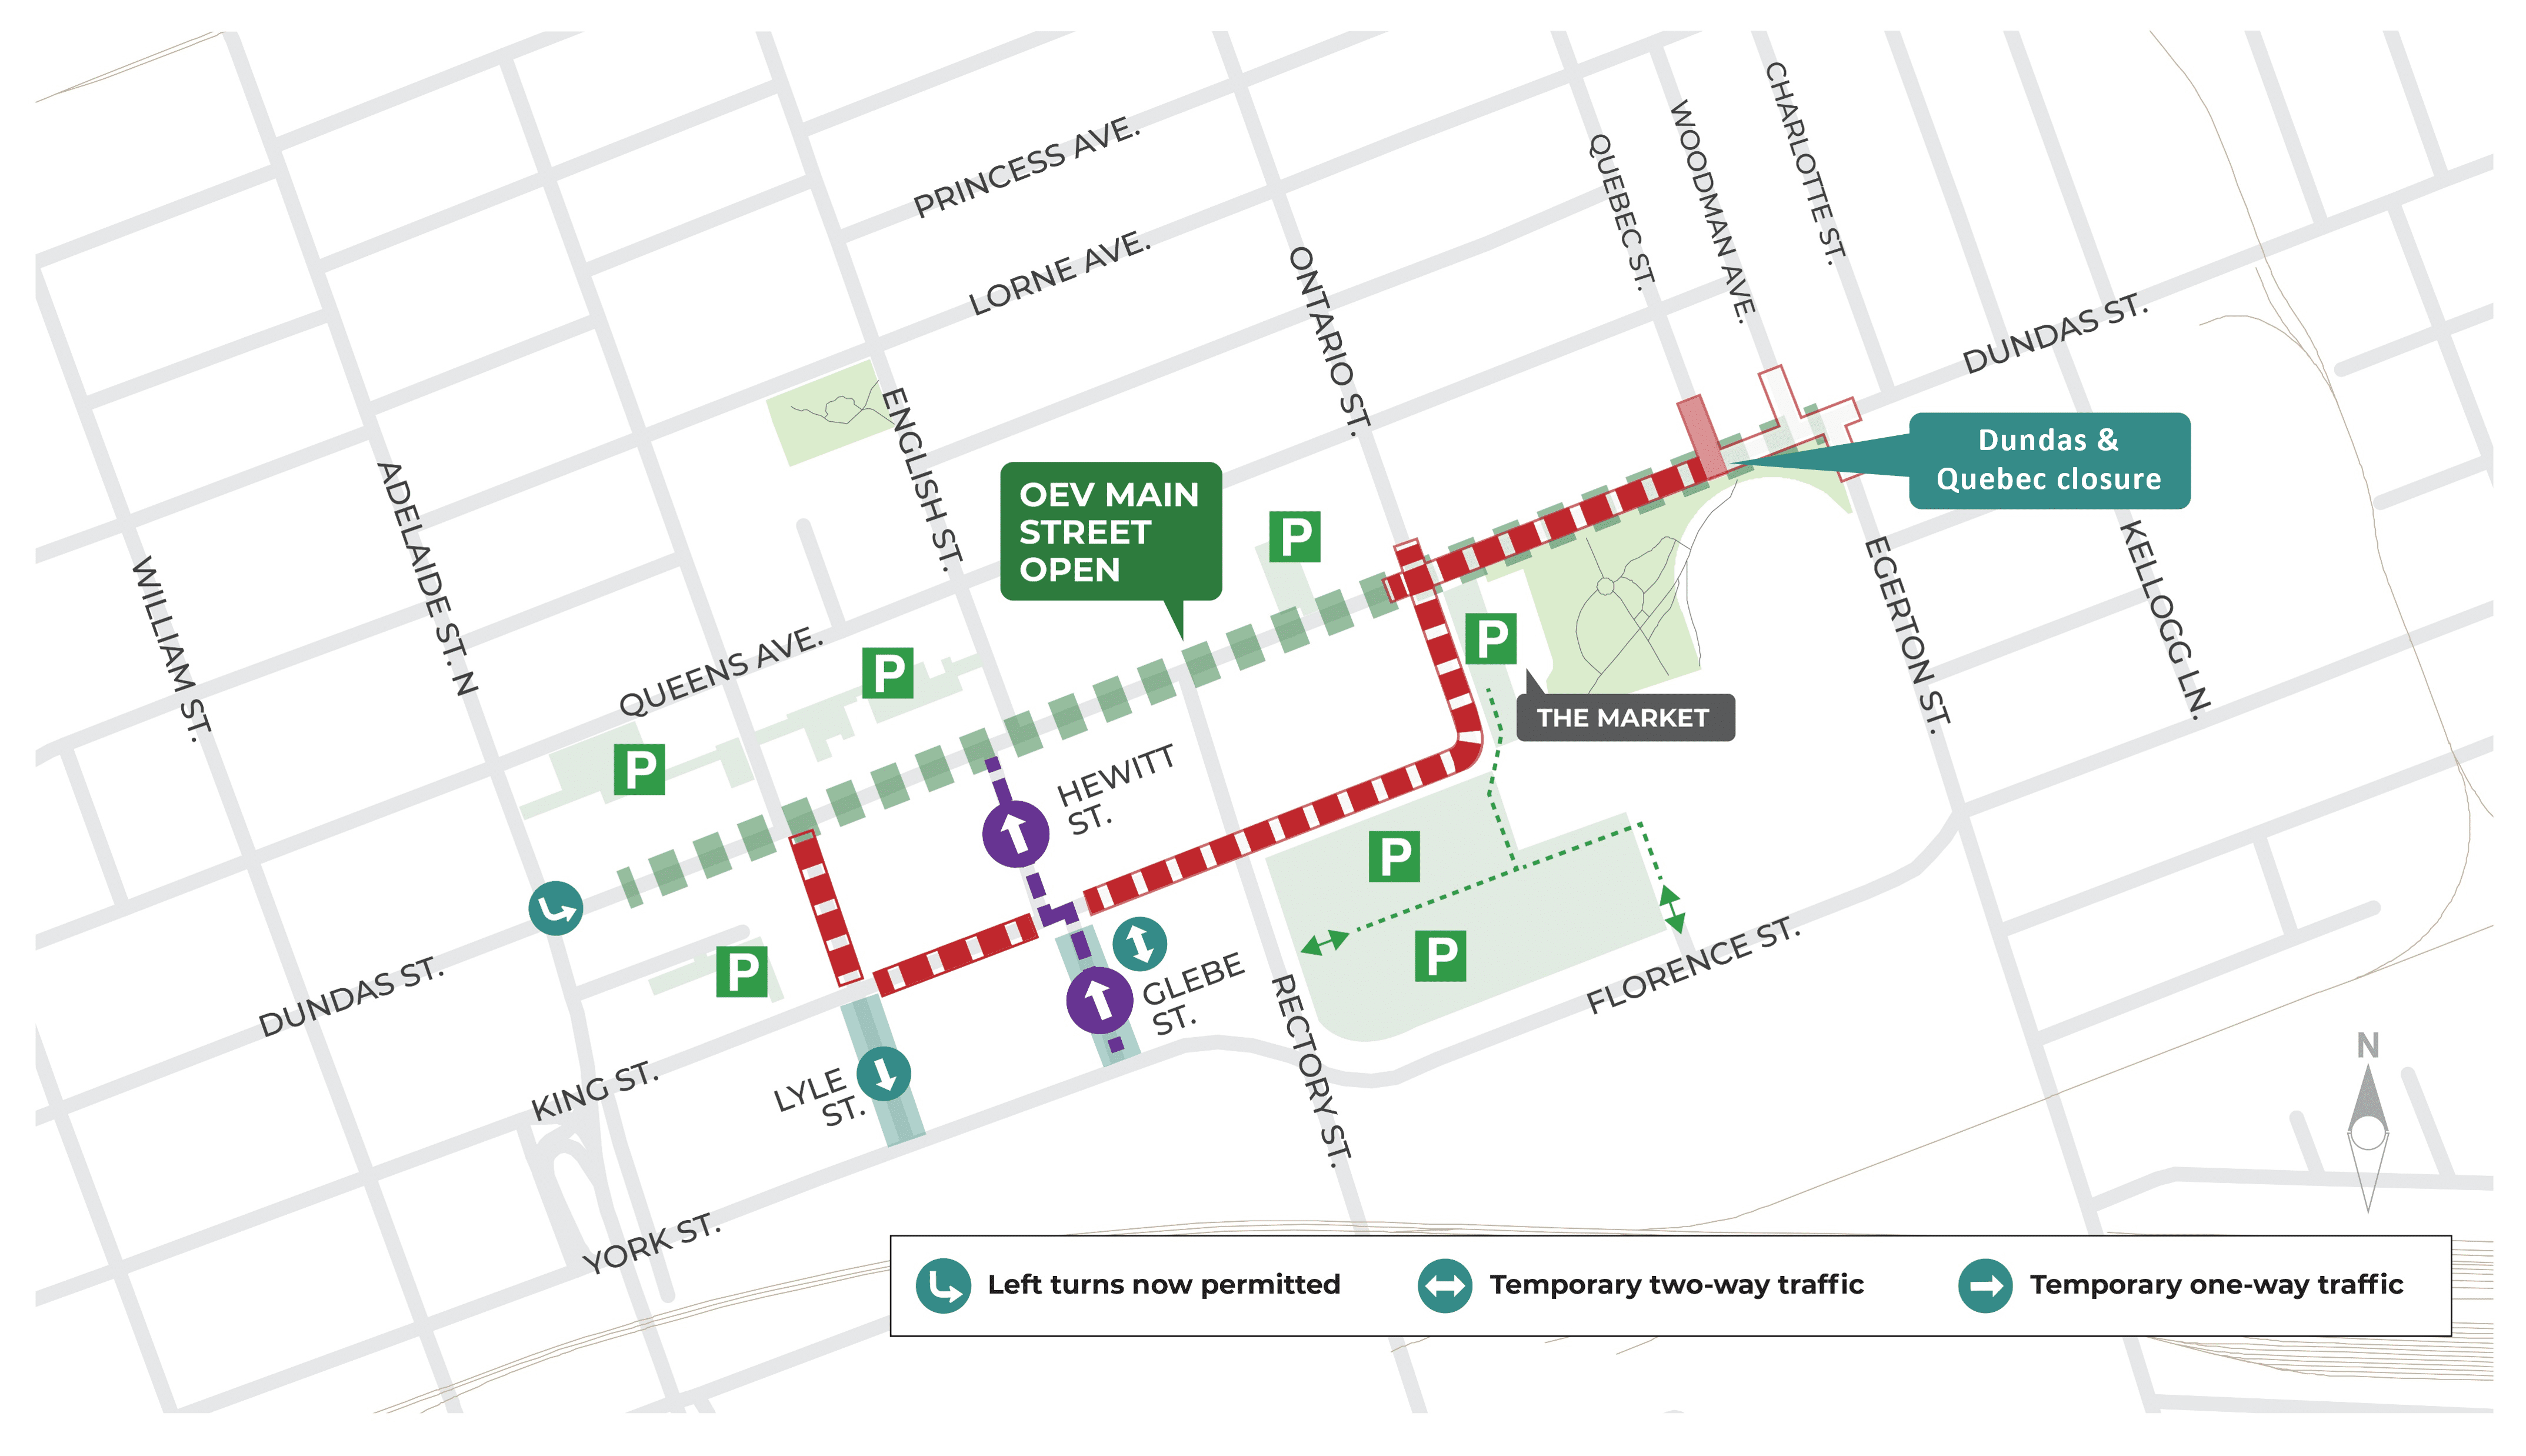 Closure of Dundas and Quebec Street intersection